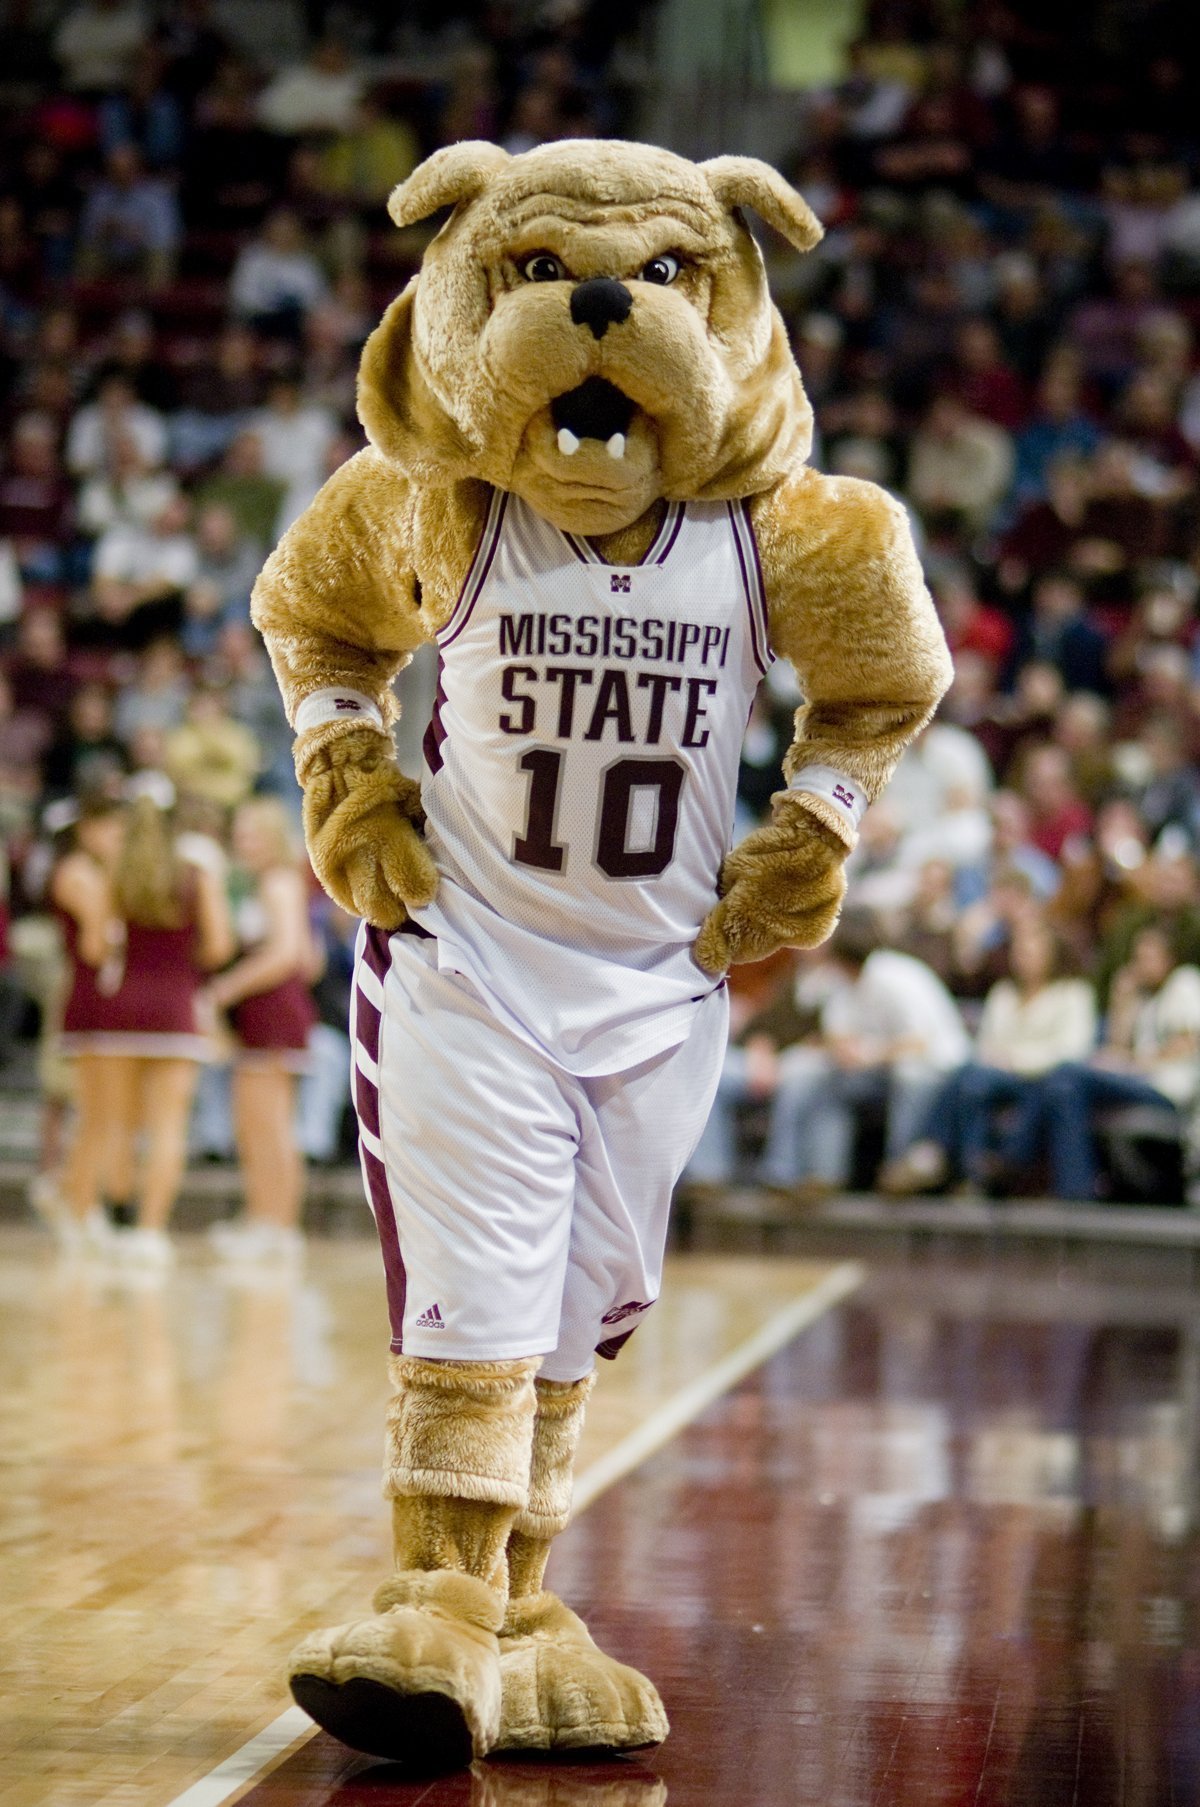 Mississippi State S Bully Mascot Settles Wrongful Injury